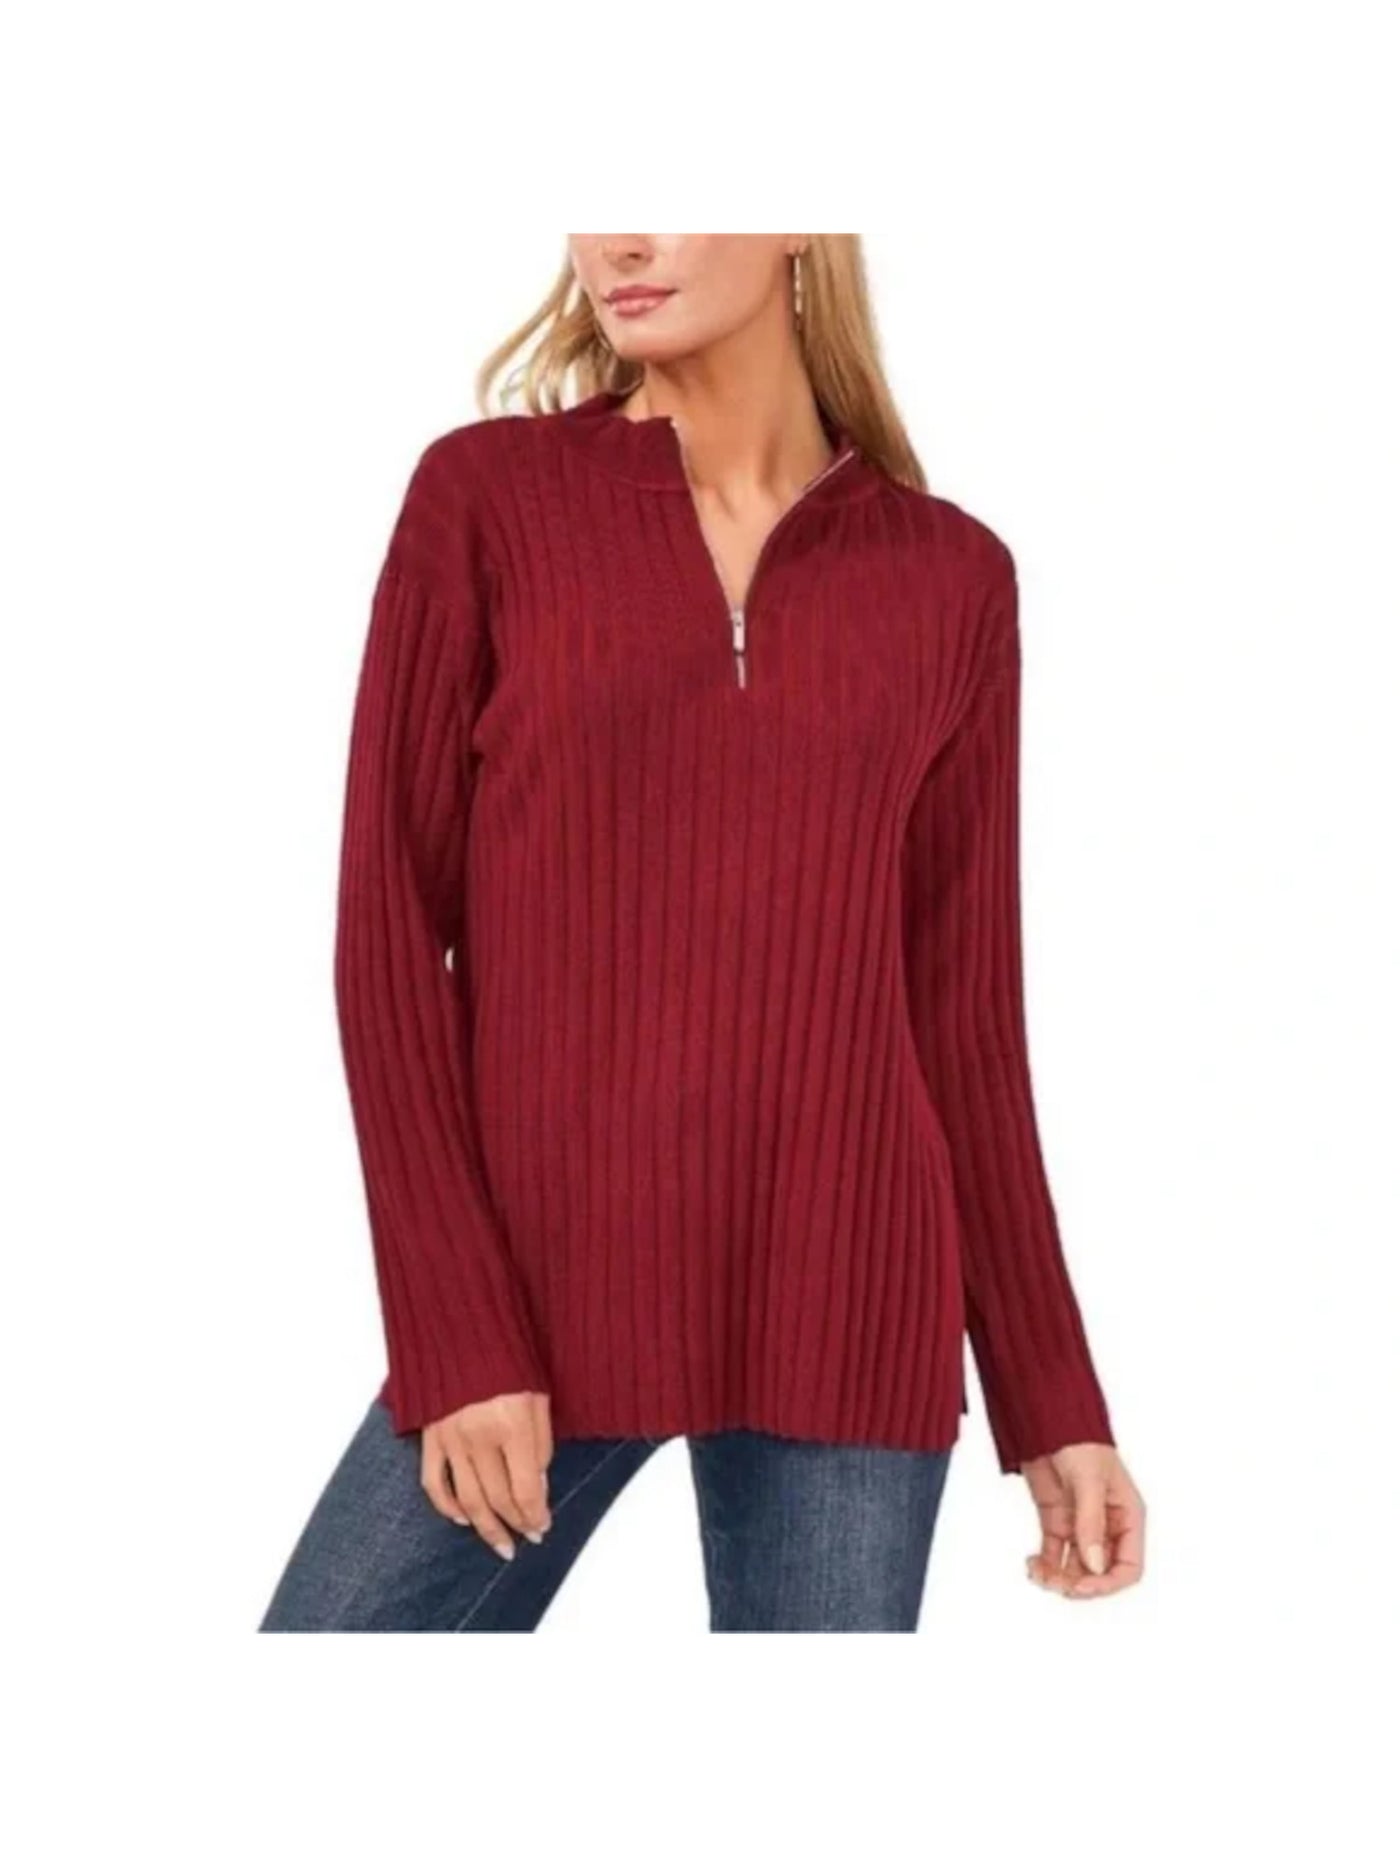 VINCE CAMUTO Womens Maroon Ribbed Quarter Zip Long Sleeve Mock Neck Sweater M